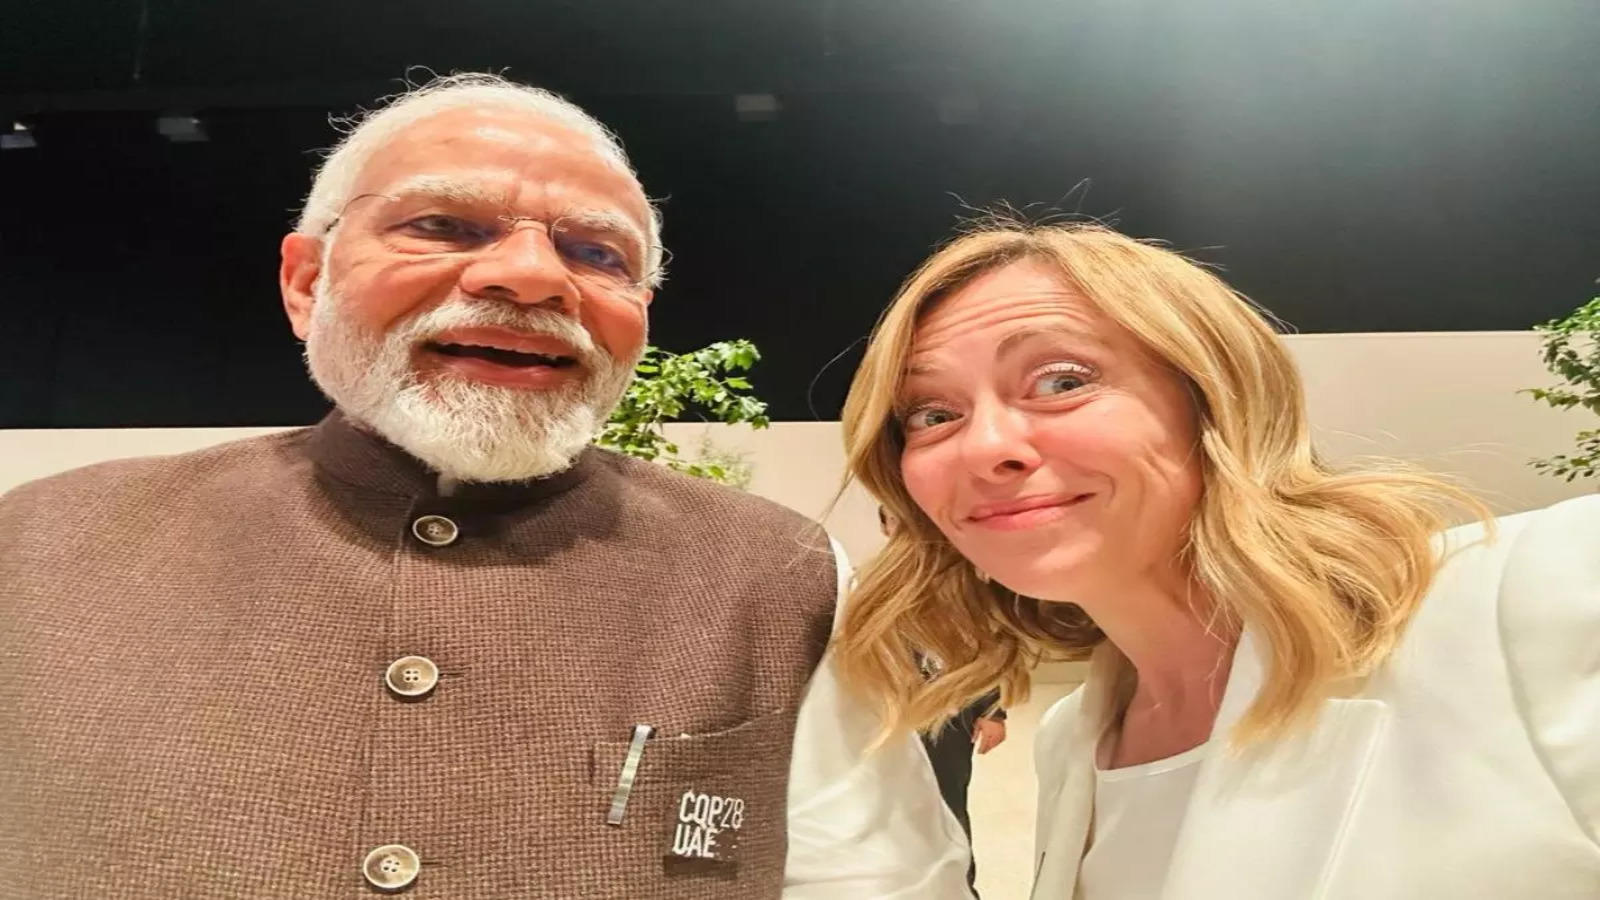 ‘Hi Friends, From #Melodi’: Giorgia Meloni and PM Modi Share Smiles in New Video from G7 – WATCH